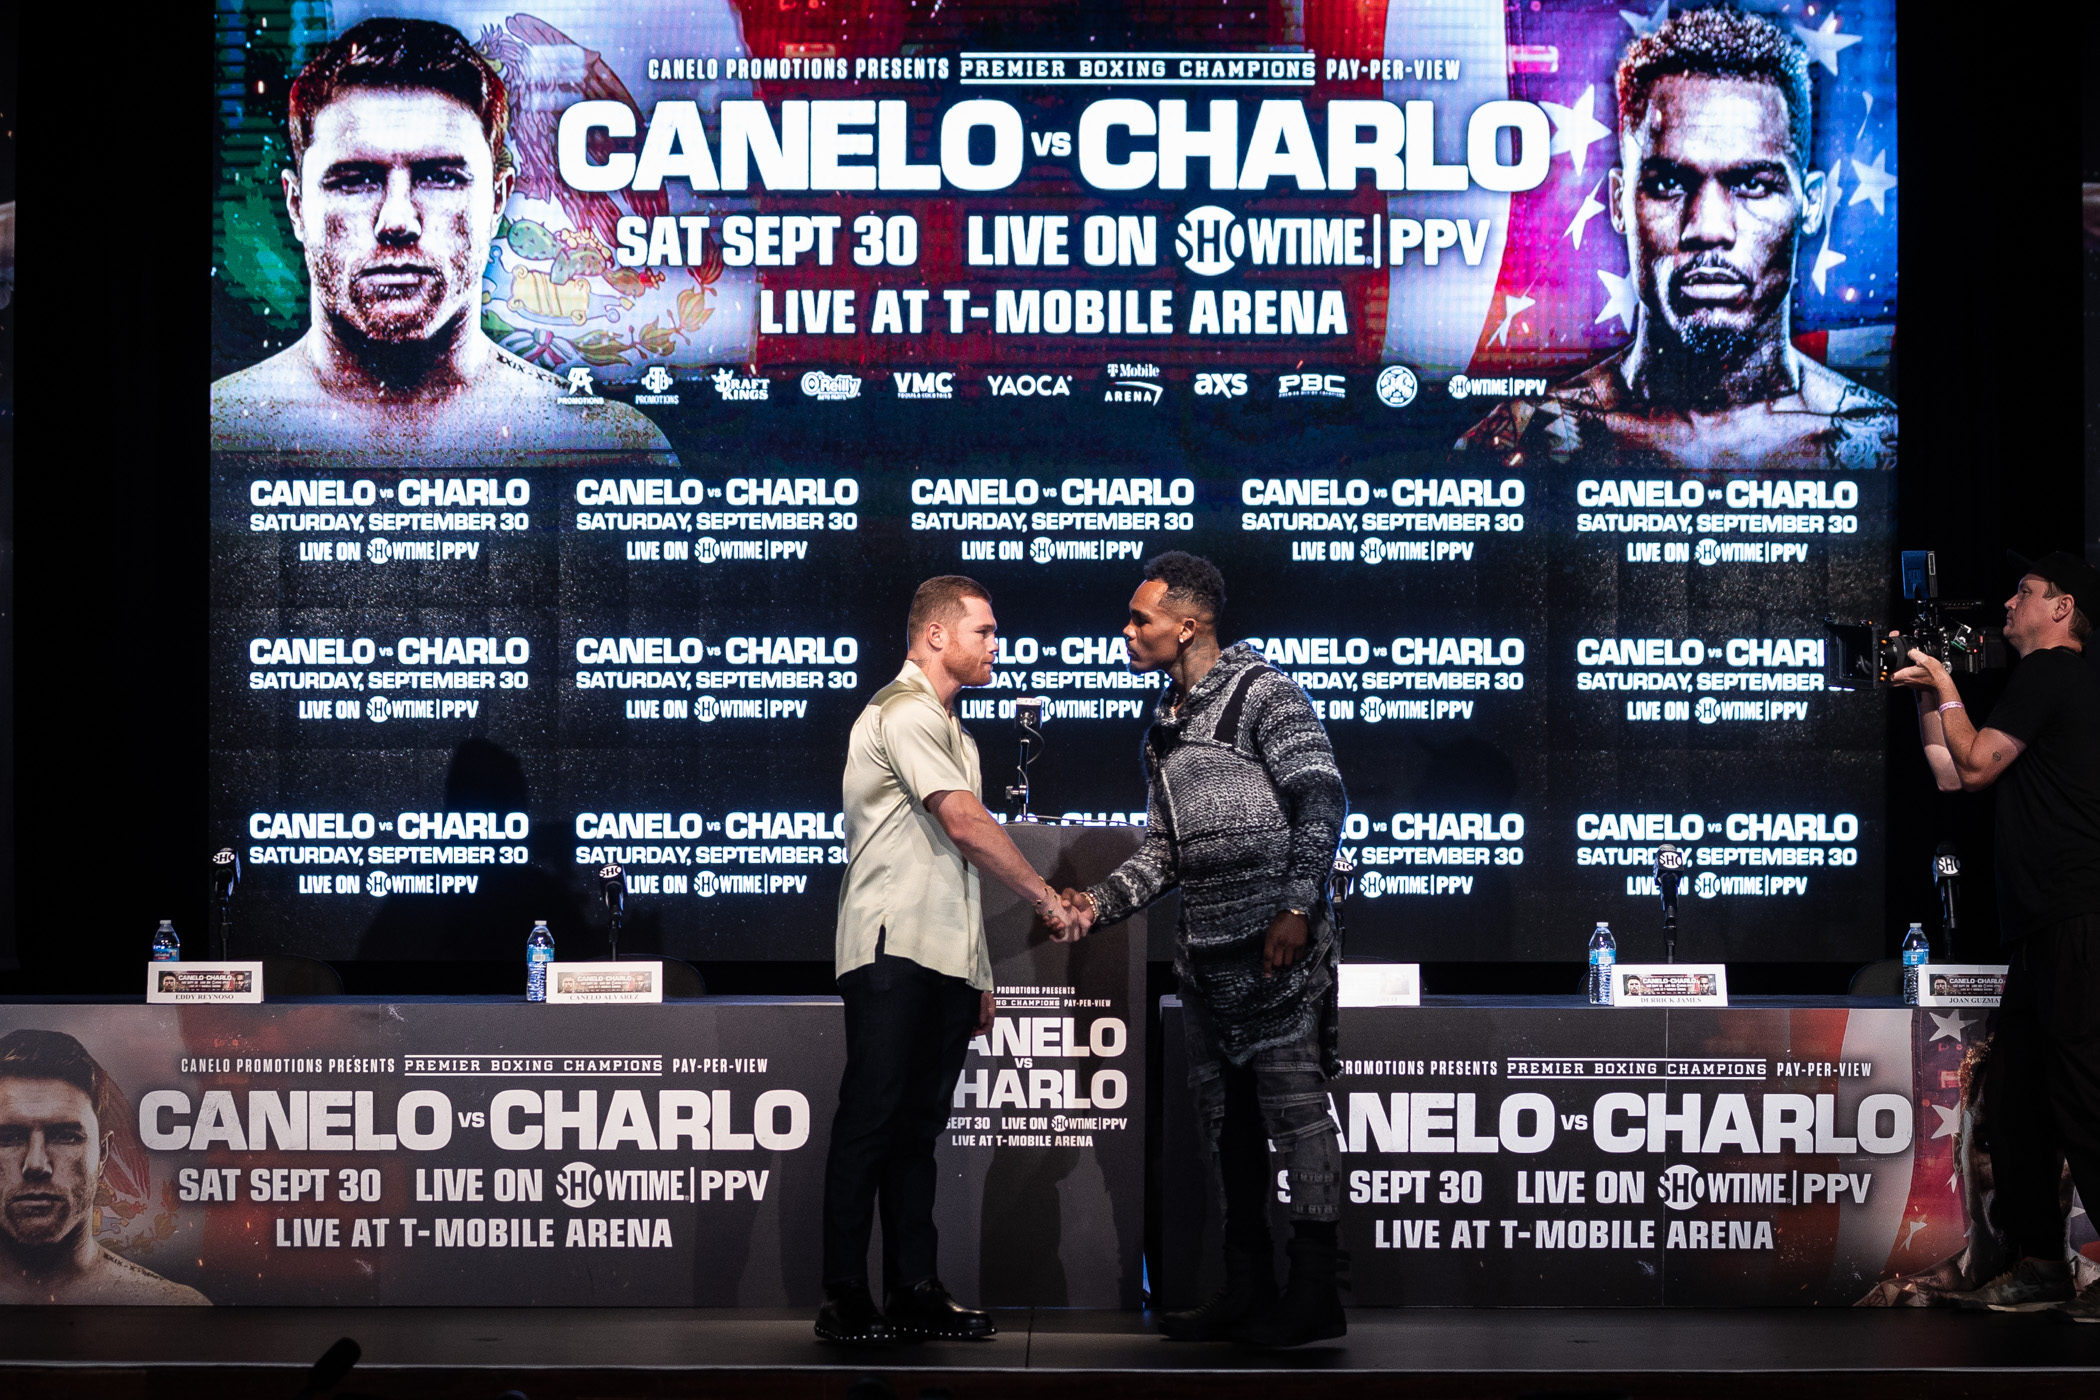 P'Canelo' Alvarez has it all to lose and questions to answer against compelling underdog Charlo